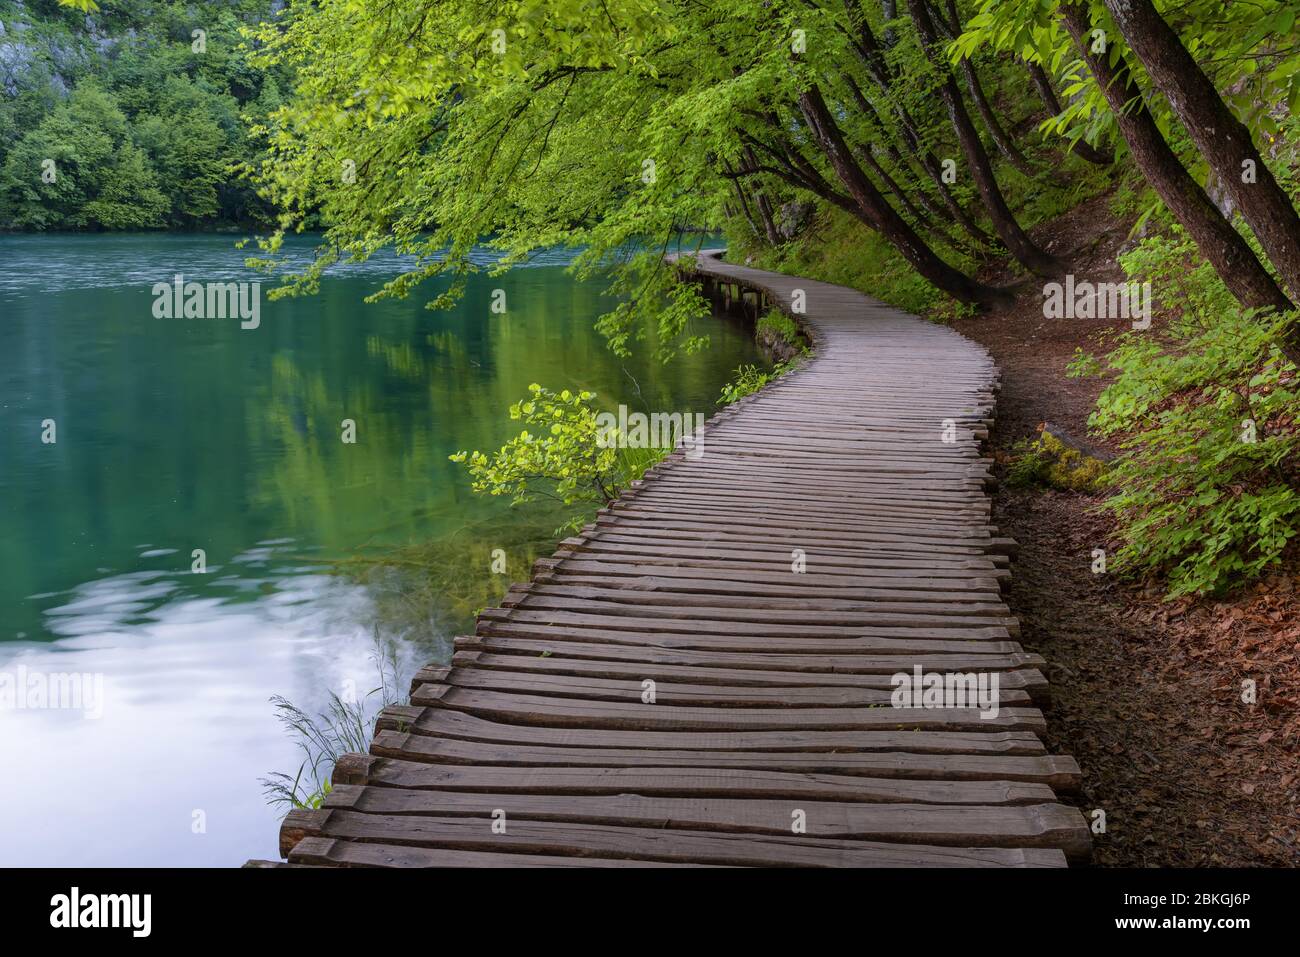 Beautiful view of waterfalls with turquoise water and wooden pathway through over water. Plitvice Lakes National Park, Croatia. Famous attraction Stock Photo